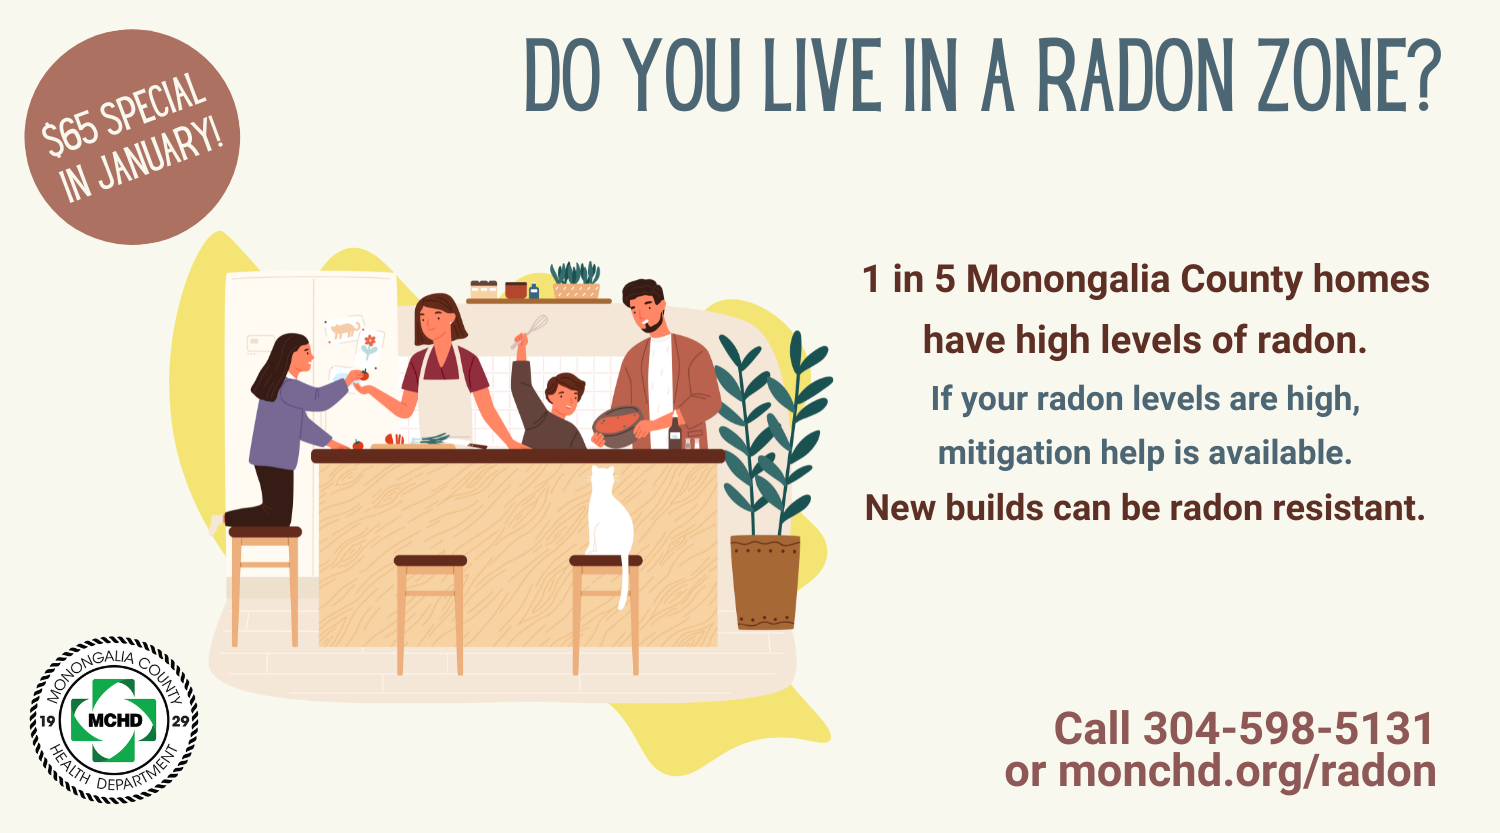 Do you live in a radon zone? MCHD can help you find out.